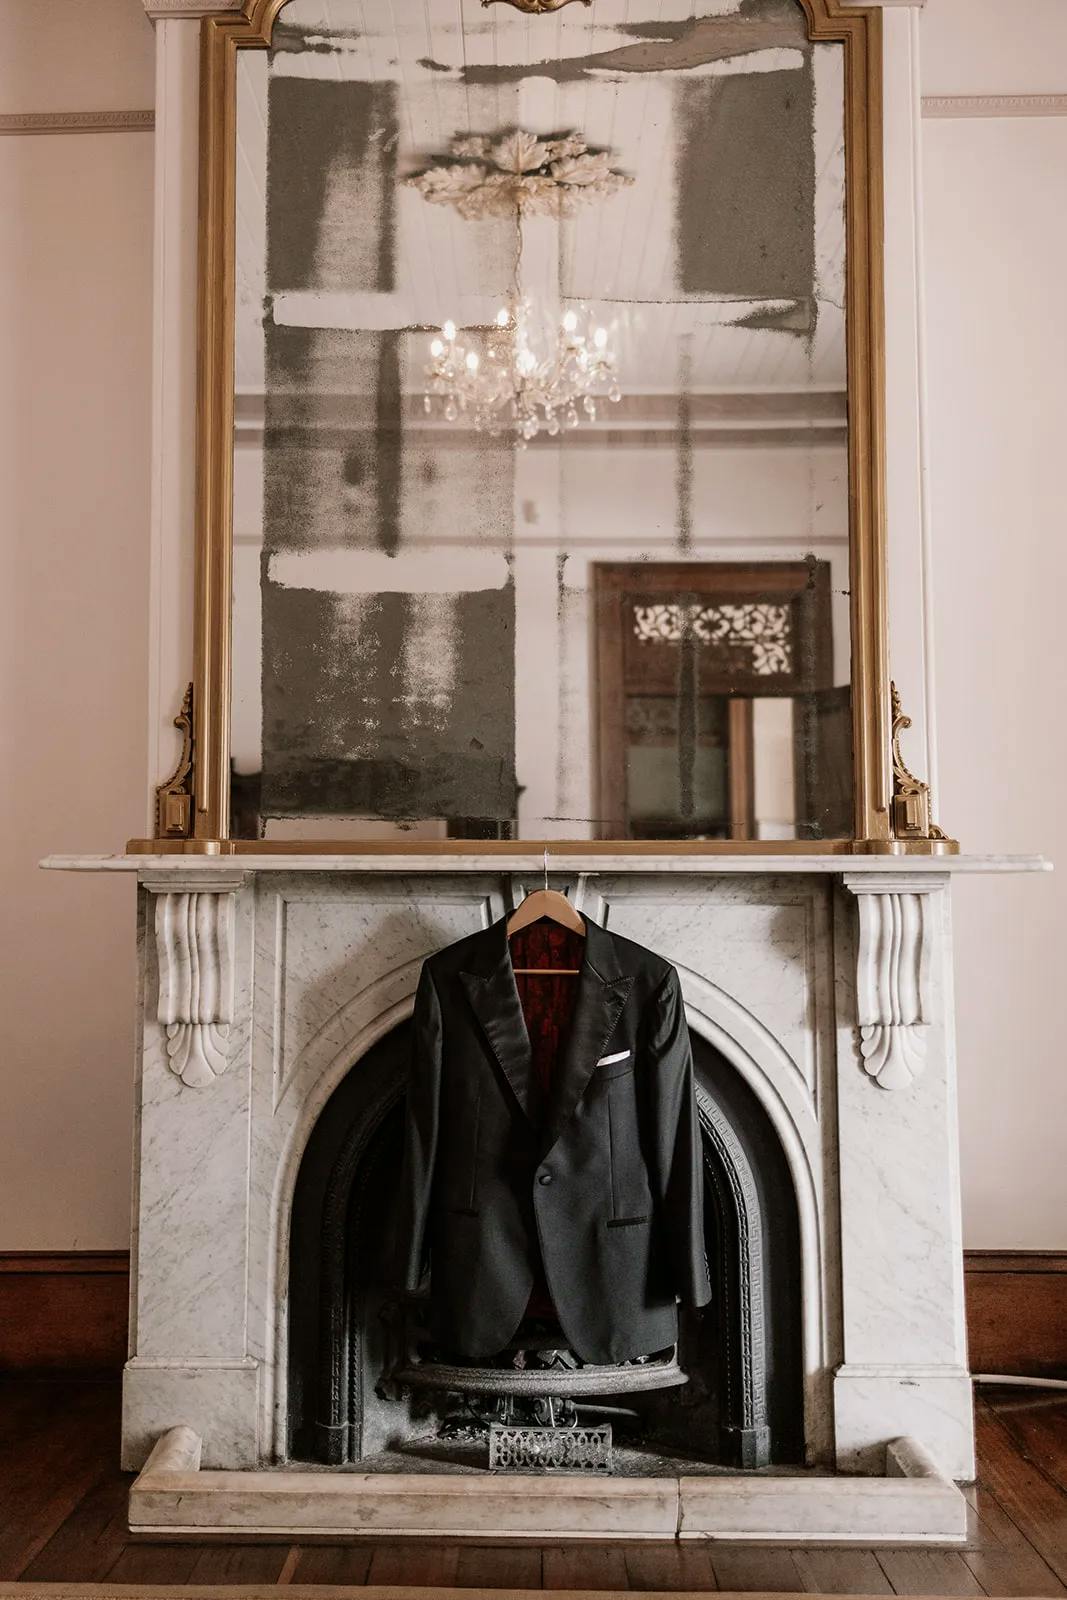 Fireplace with suit jacket hanging in front